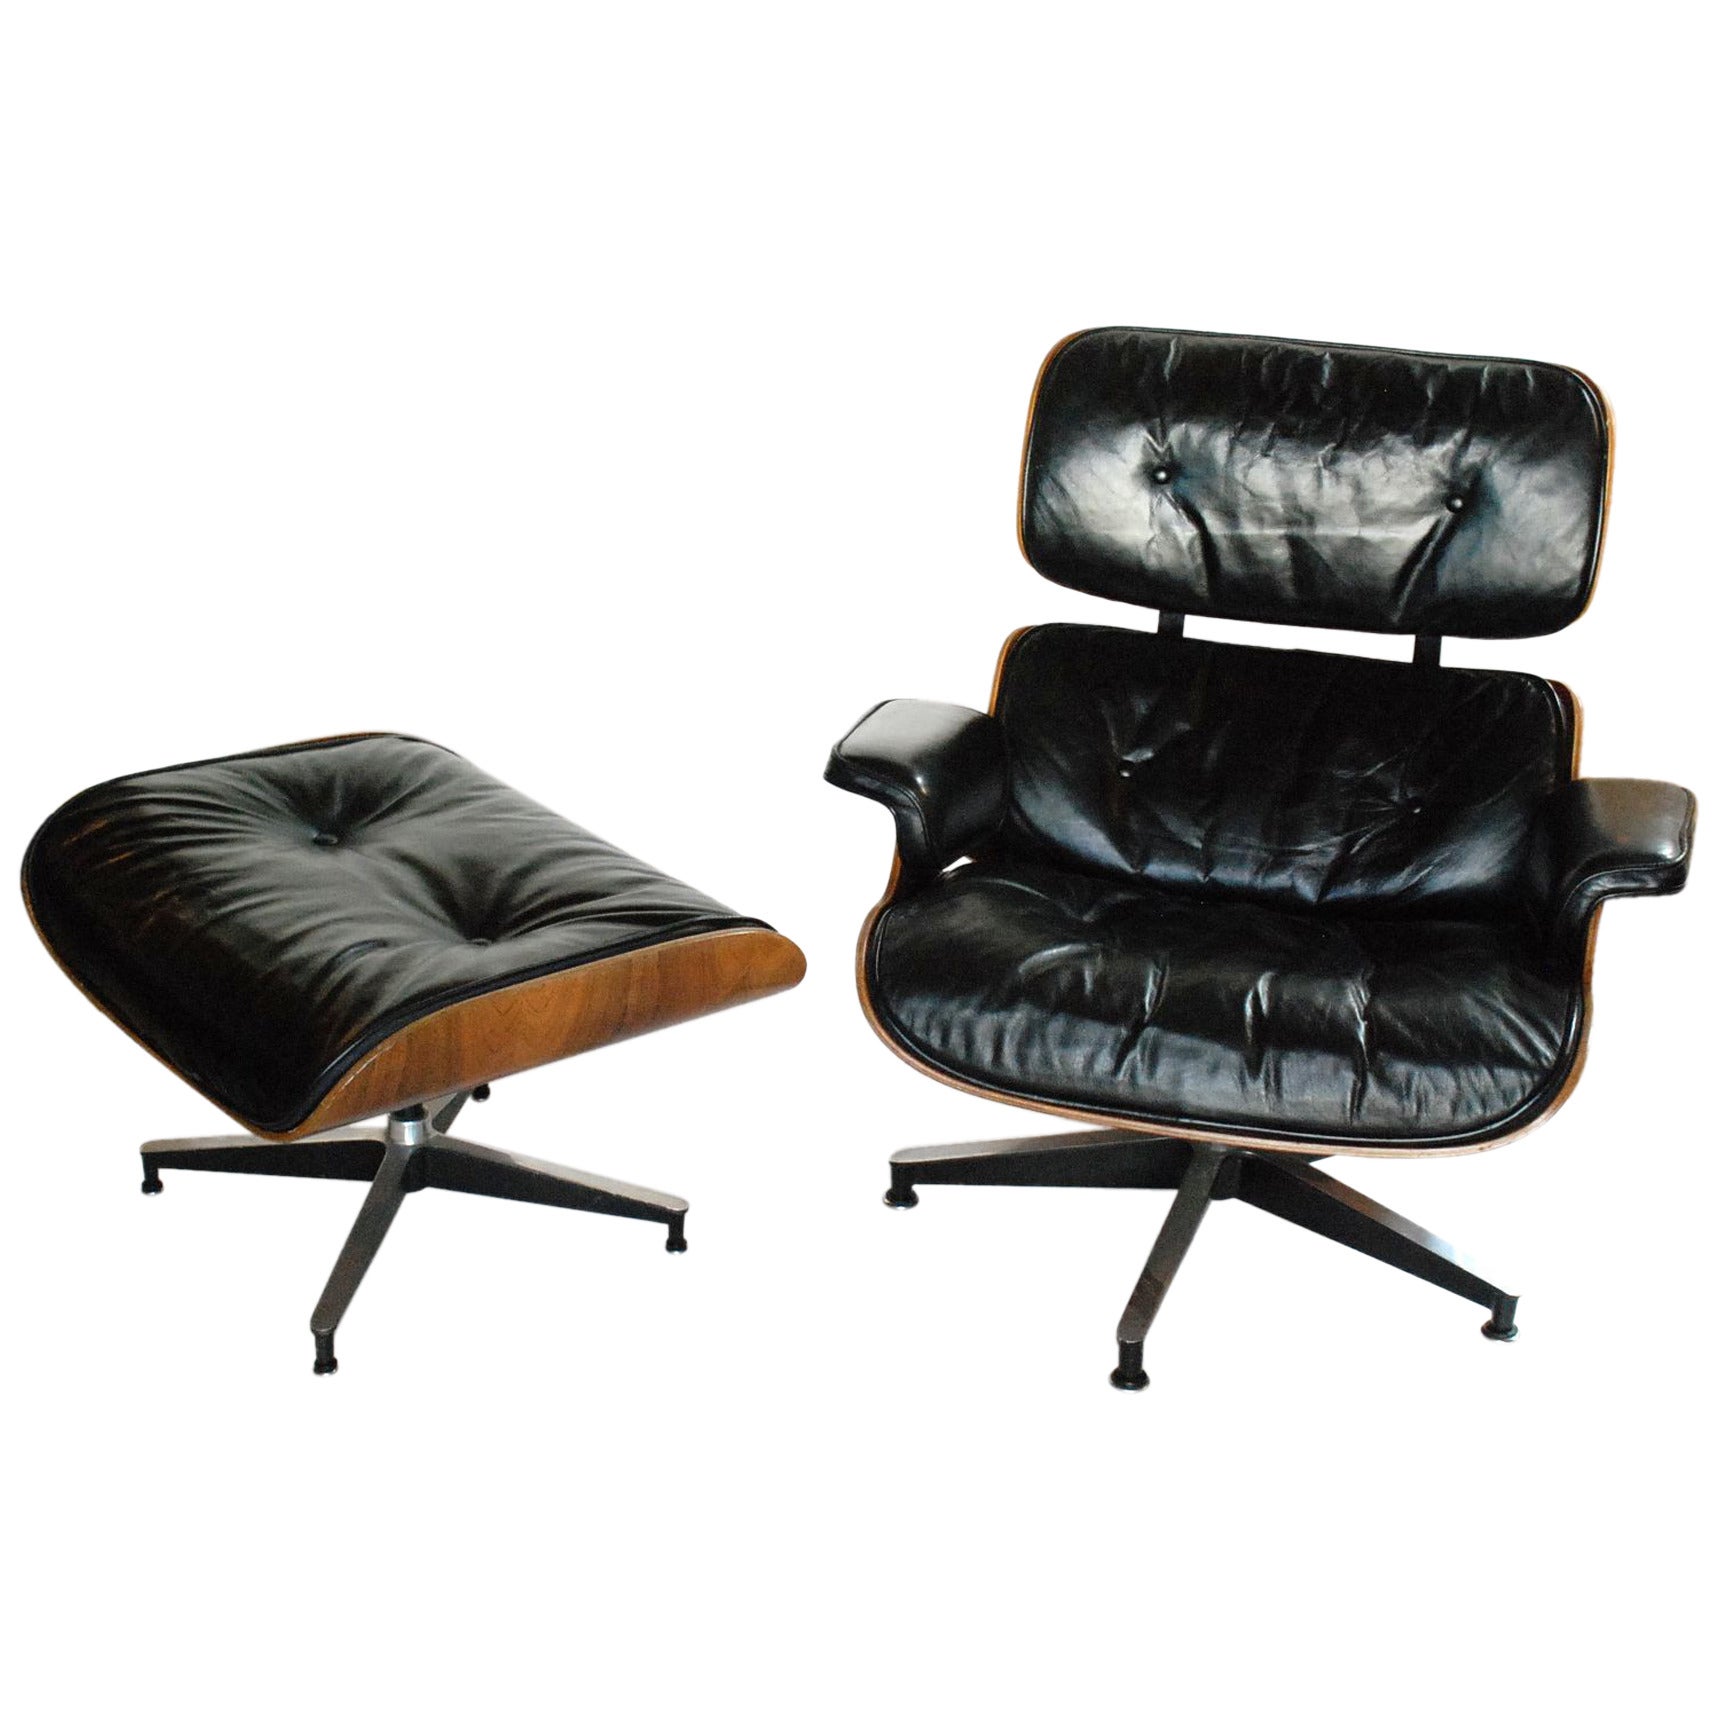 Early Original Eames Lounge 670, 671 Armchair and Ottoman